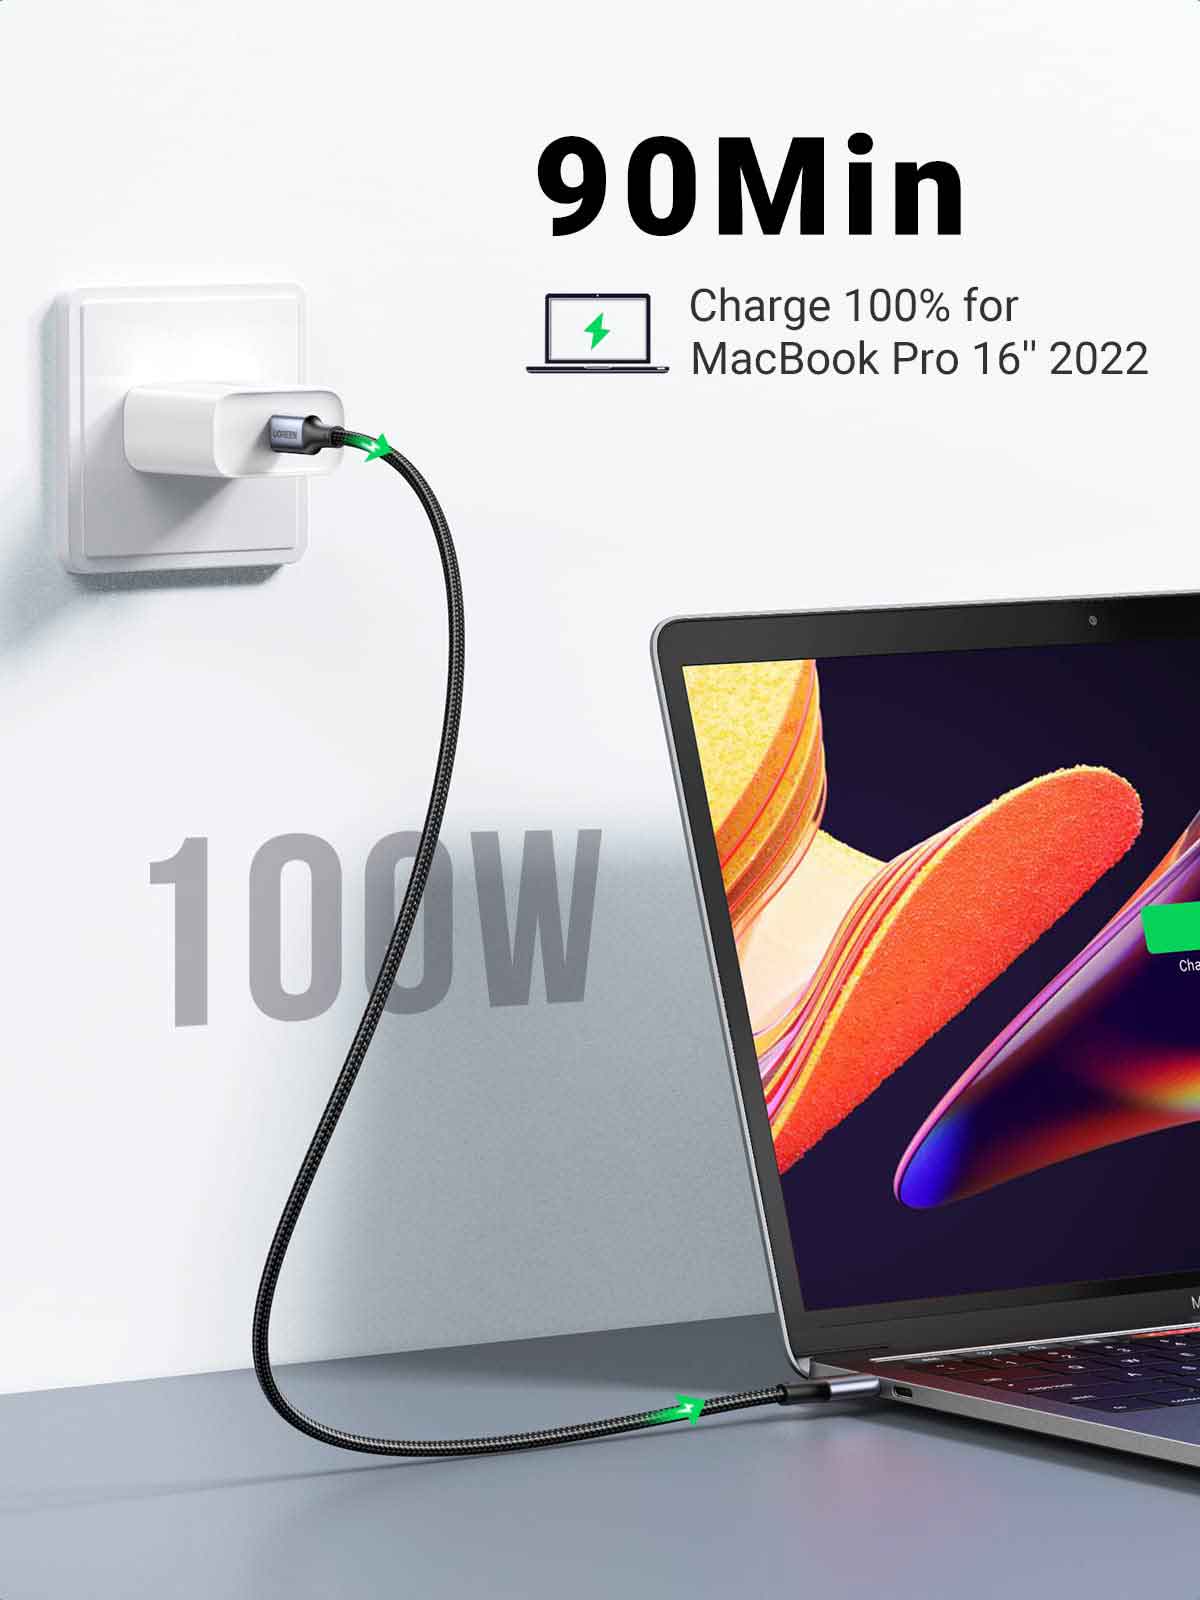 100W USB C to USB C Cable 2-Pack - Fast Charge Your Devices – USBYON